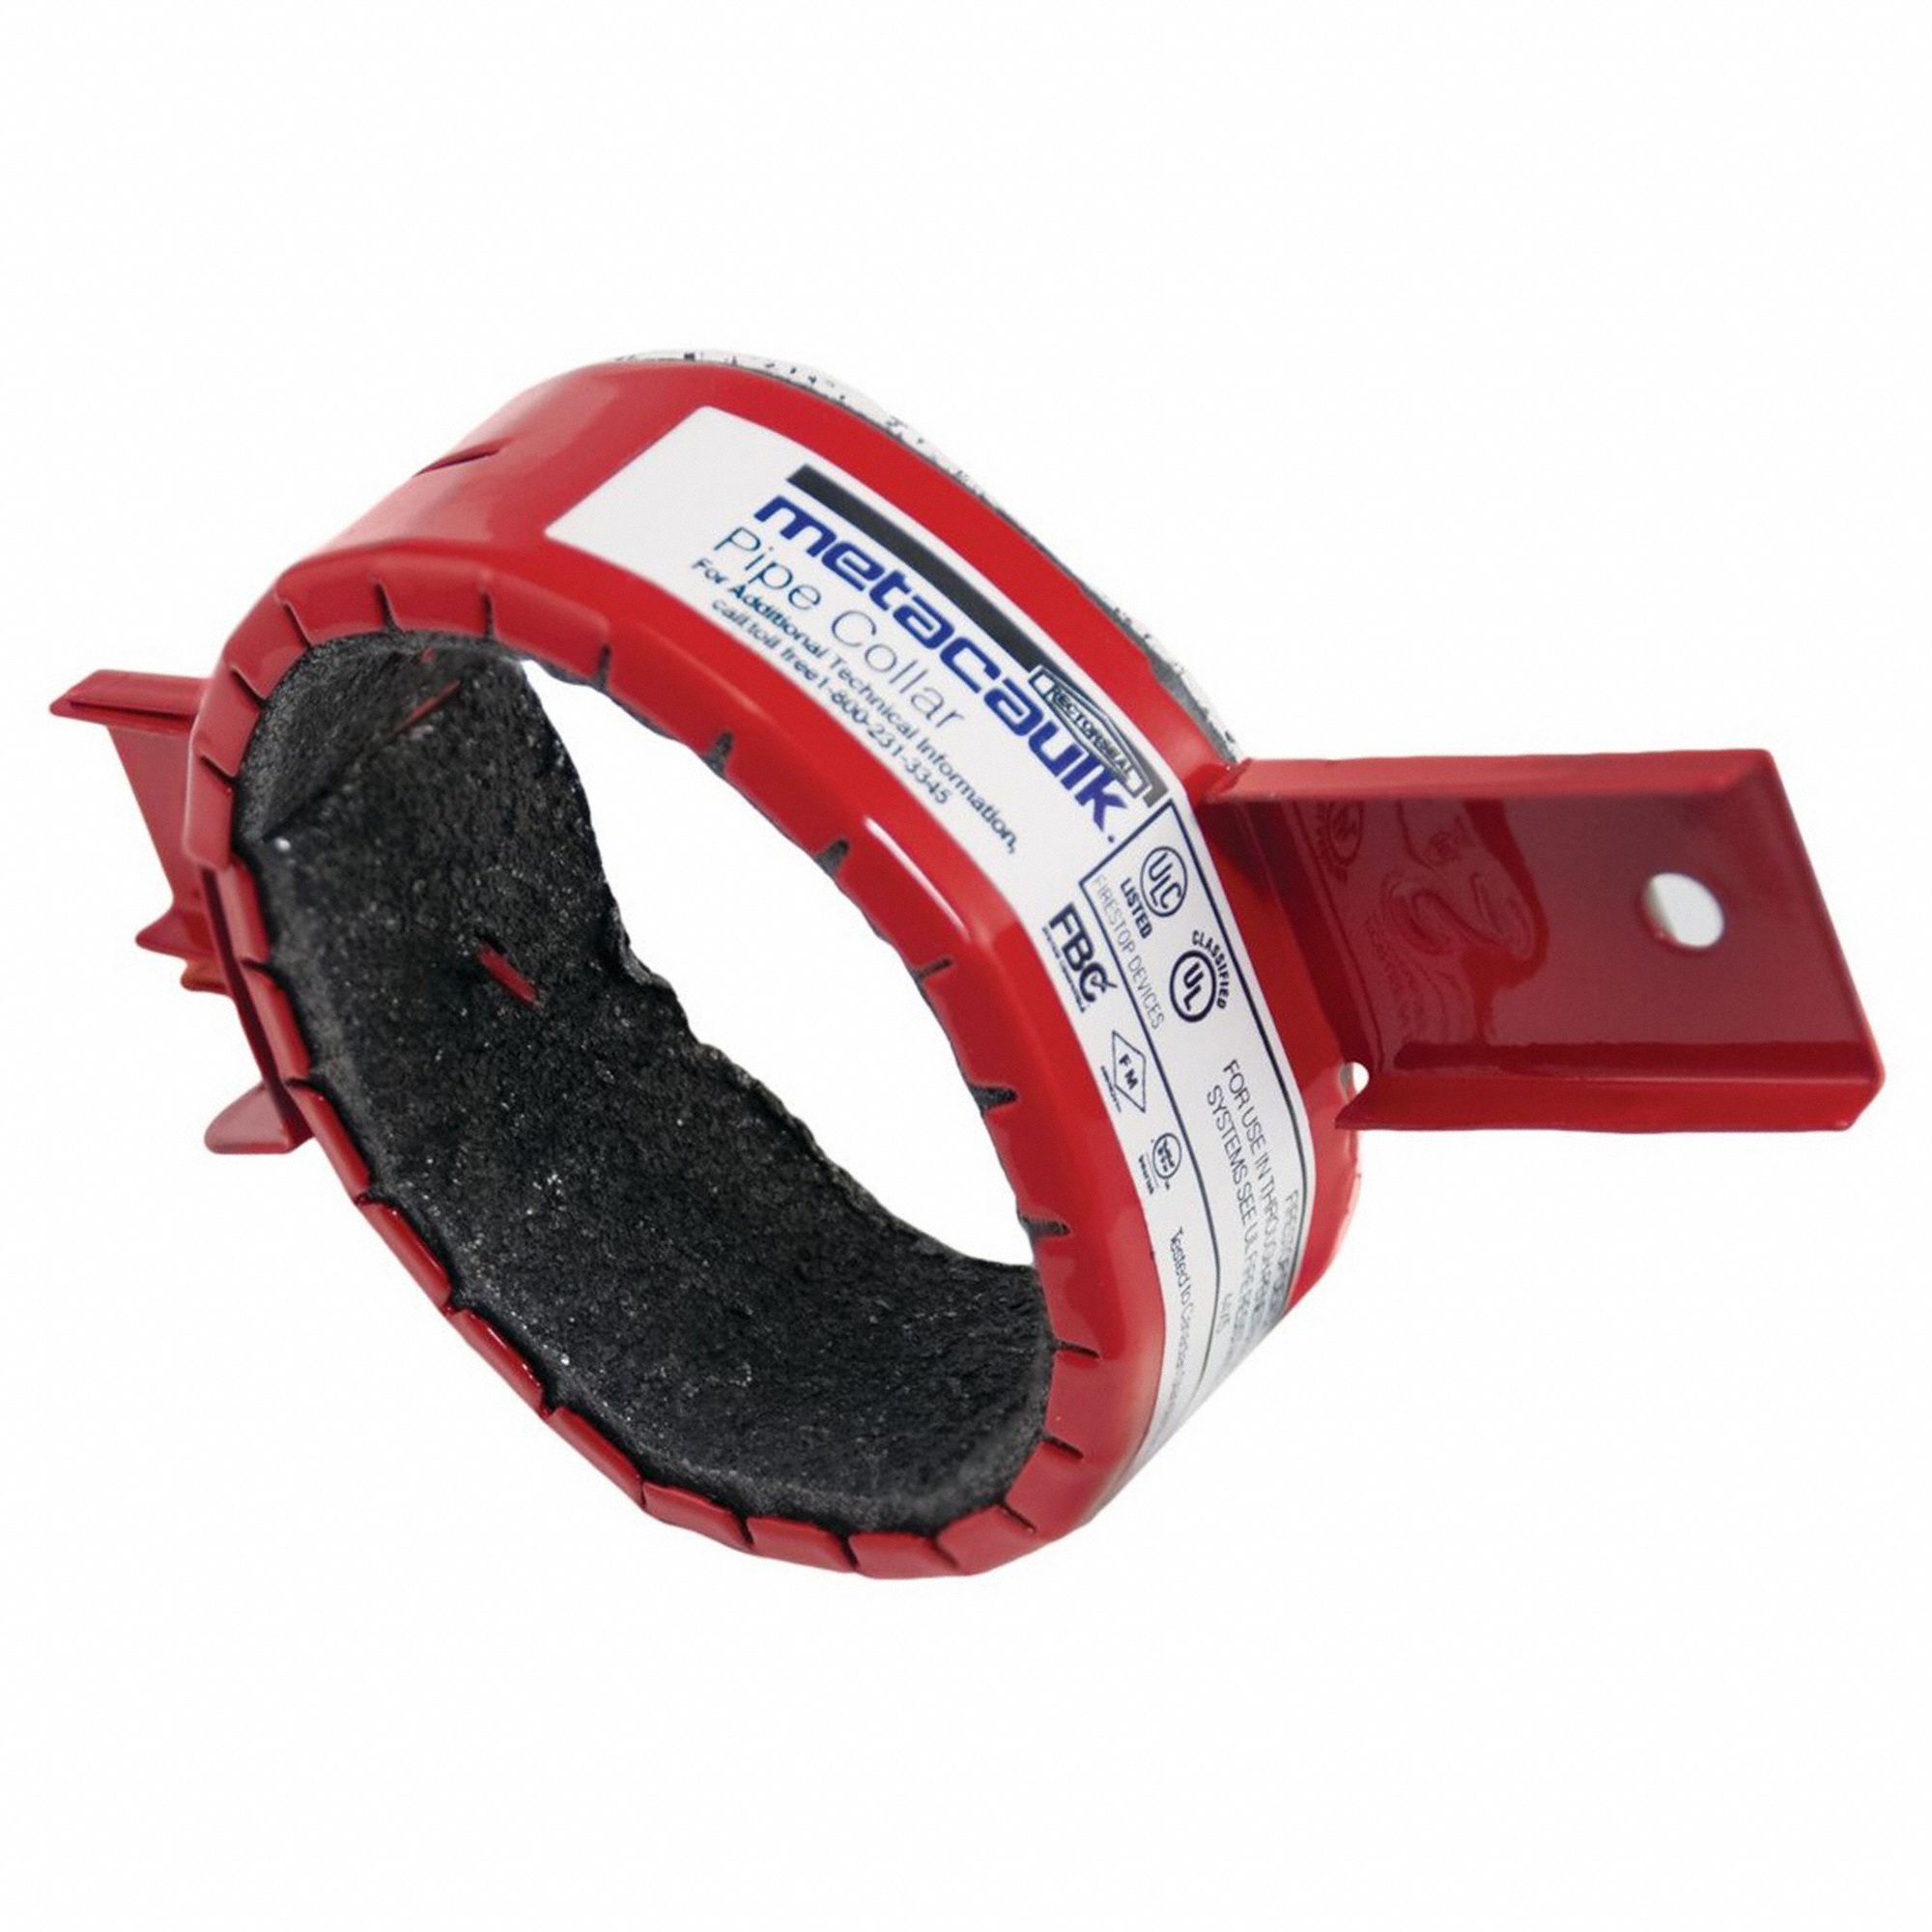 Firestop Pipe Collar: 2 in For Pipe Size, Plastic Pipe, Up to 3 hr, 5 in Ht